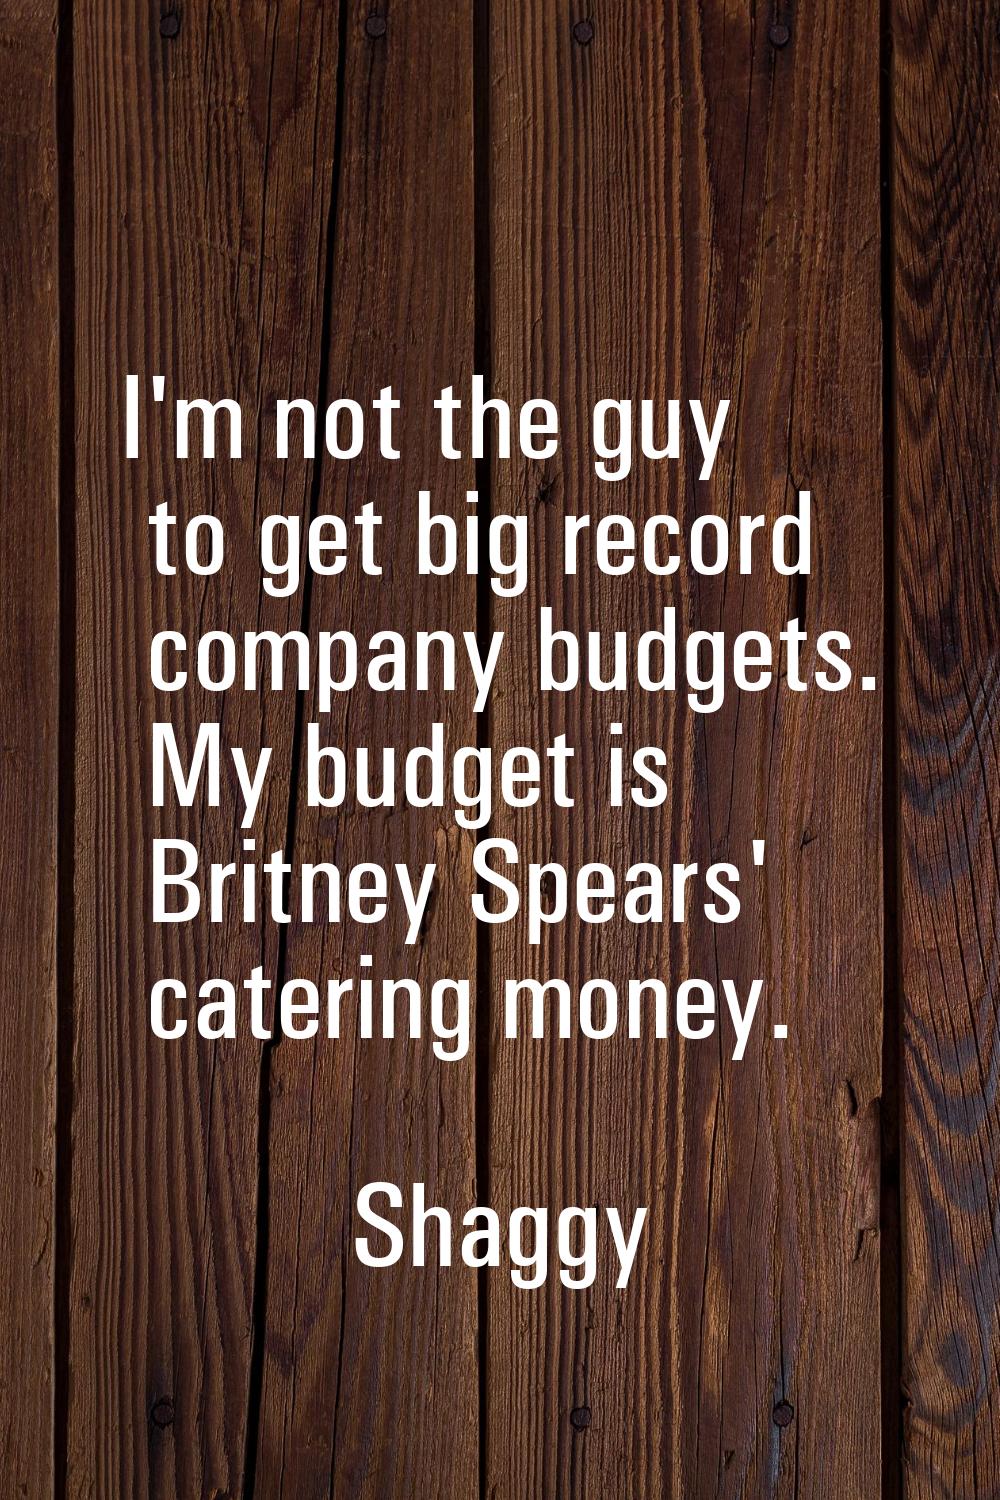 I'm not the guy to get big record company budgets. My budget is Britney Spears' catering money.